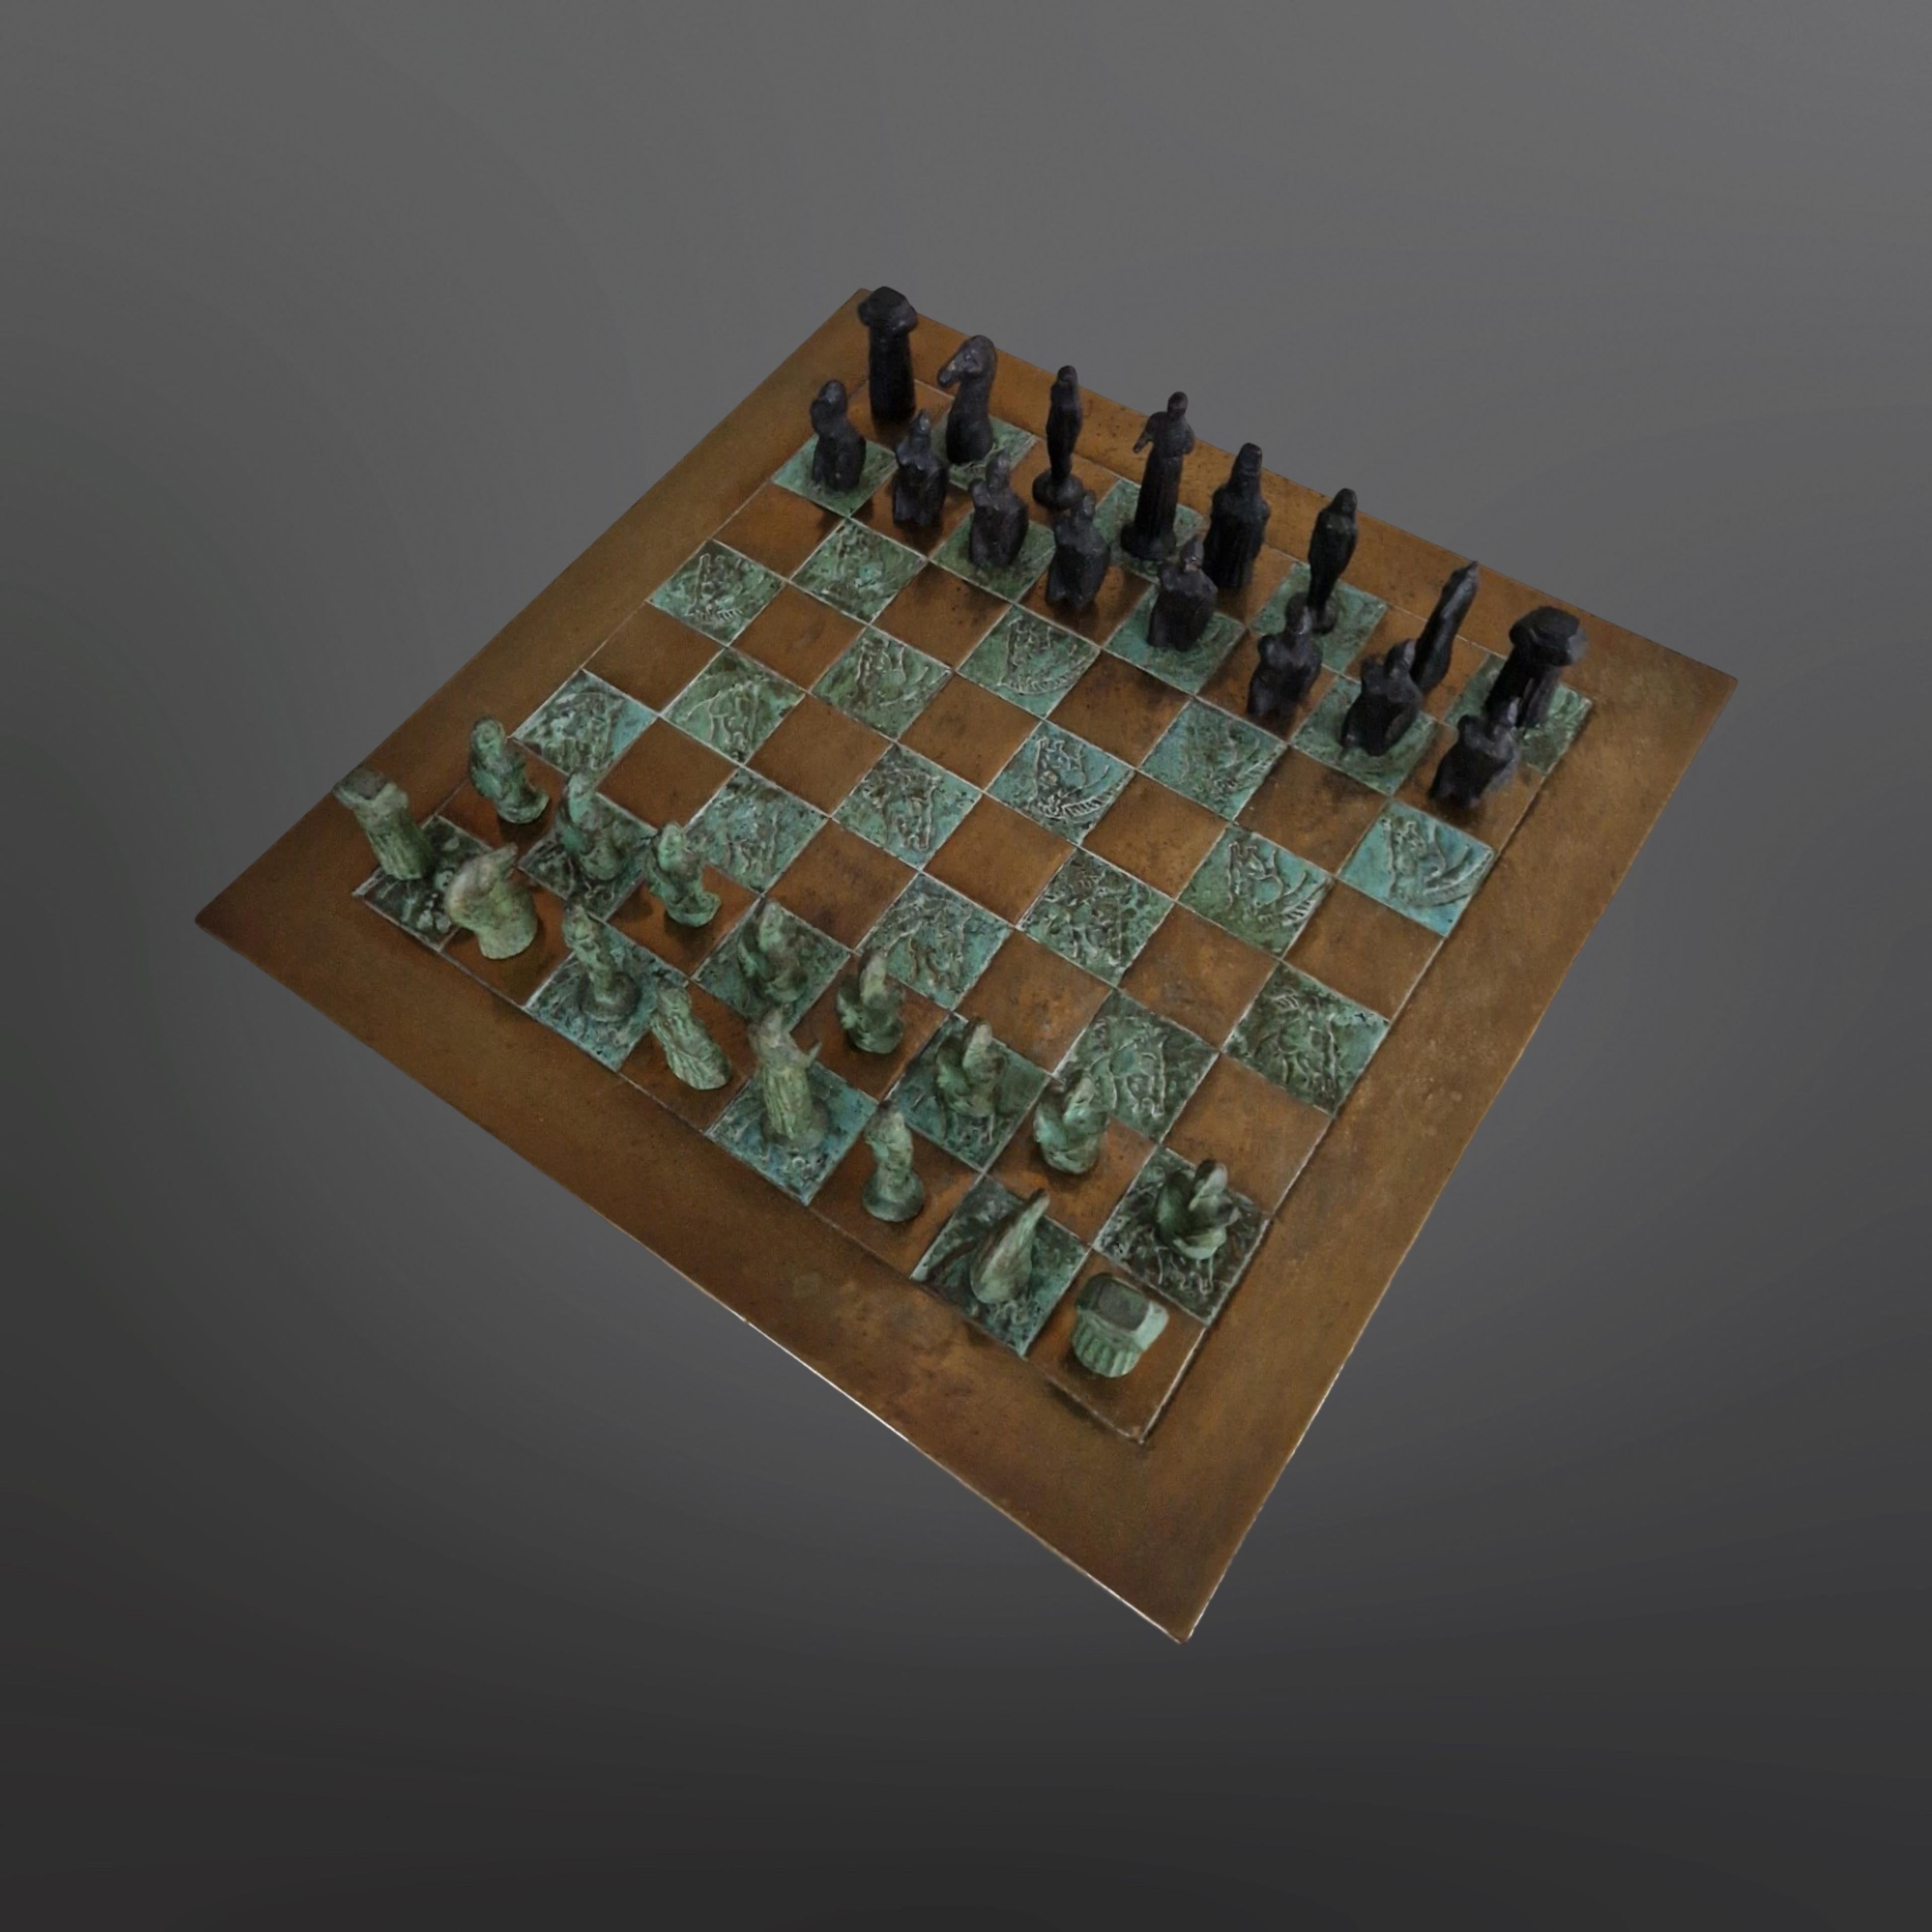 Stylish mid century chess set. The pieces are made from cast bronze. The playing field is made from copper embossed with horse heads and hammered around a wooden board. Underneath there is green felt. 
Made in the style of Ancient Greek mythology.